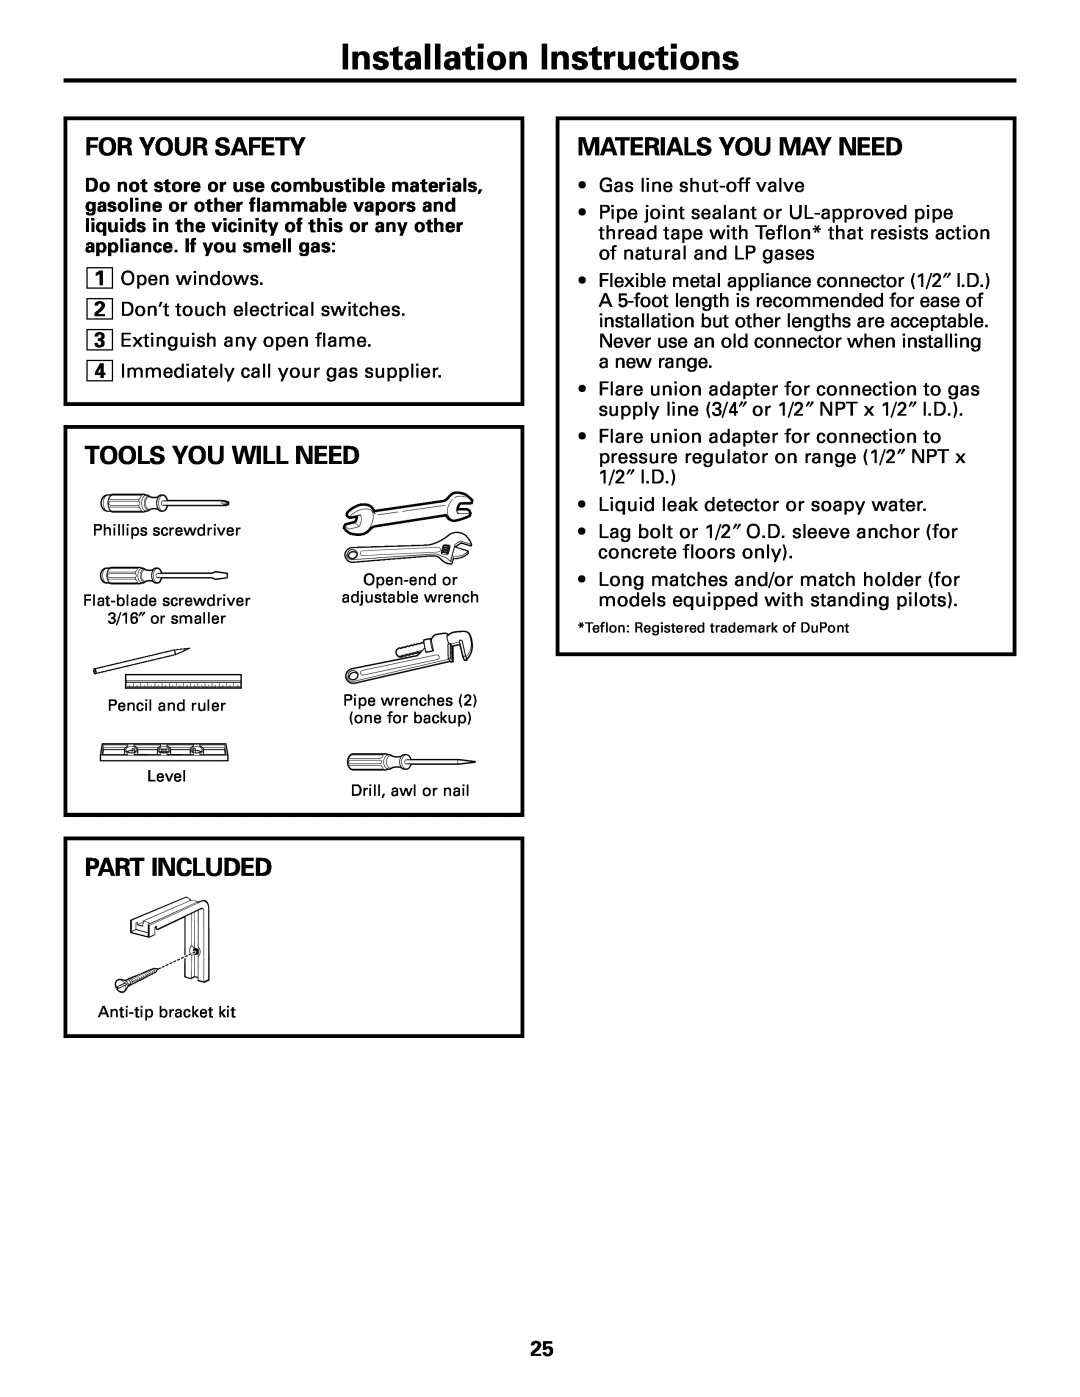 Americana Appliances AGBS300 Installation Instructions, For Your Safety, Tools You Will Need, Part Included 